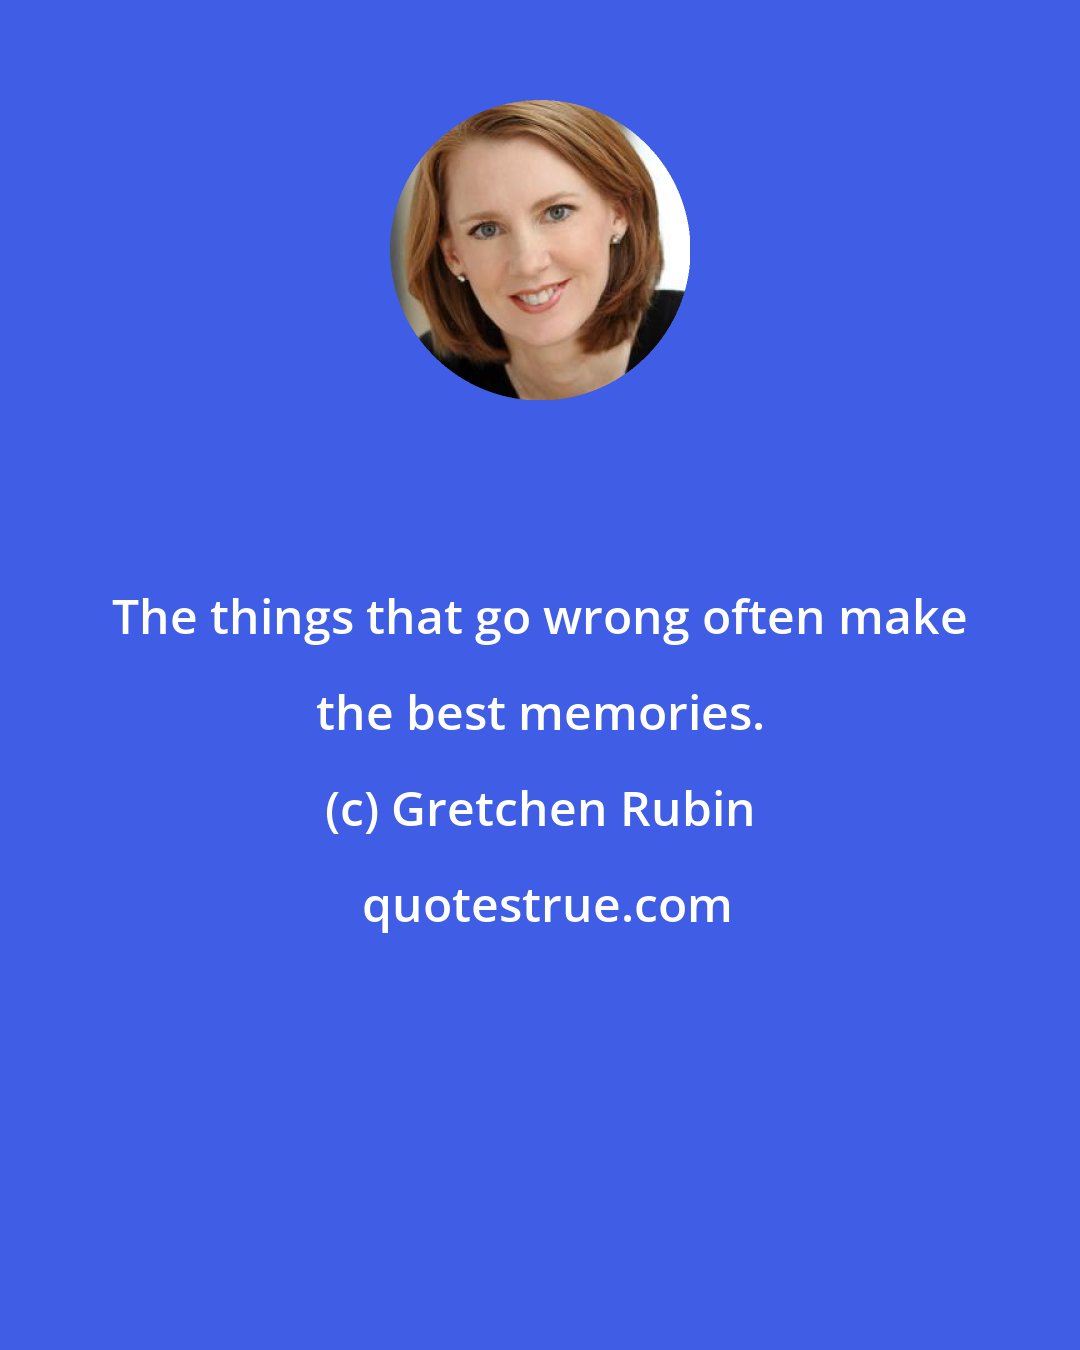 Gretchen Rubin: The things that go wrong often make the best memories.